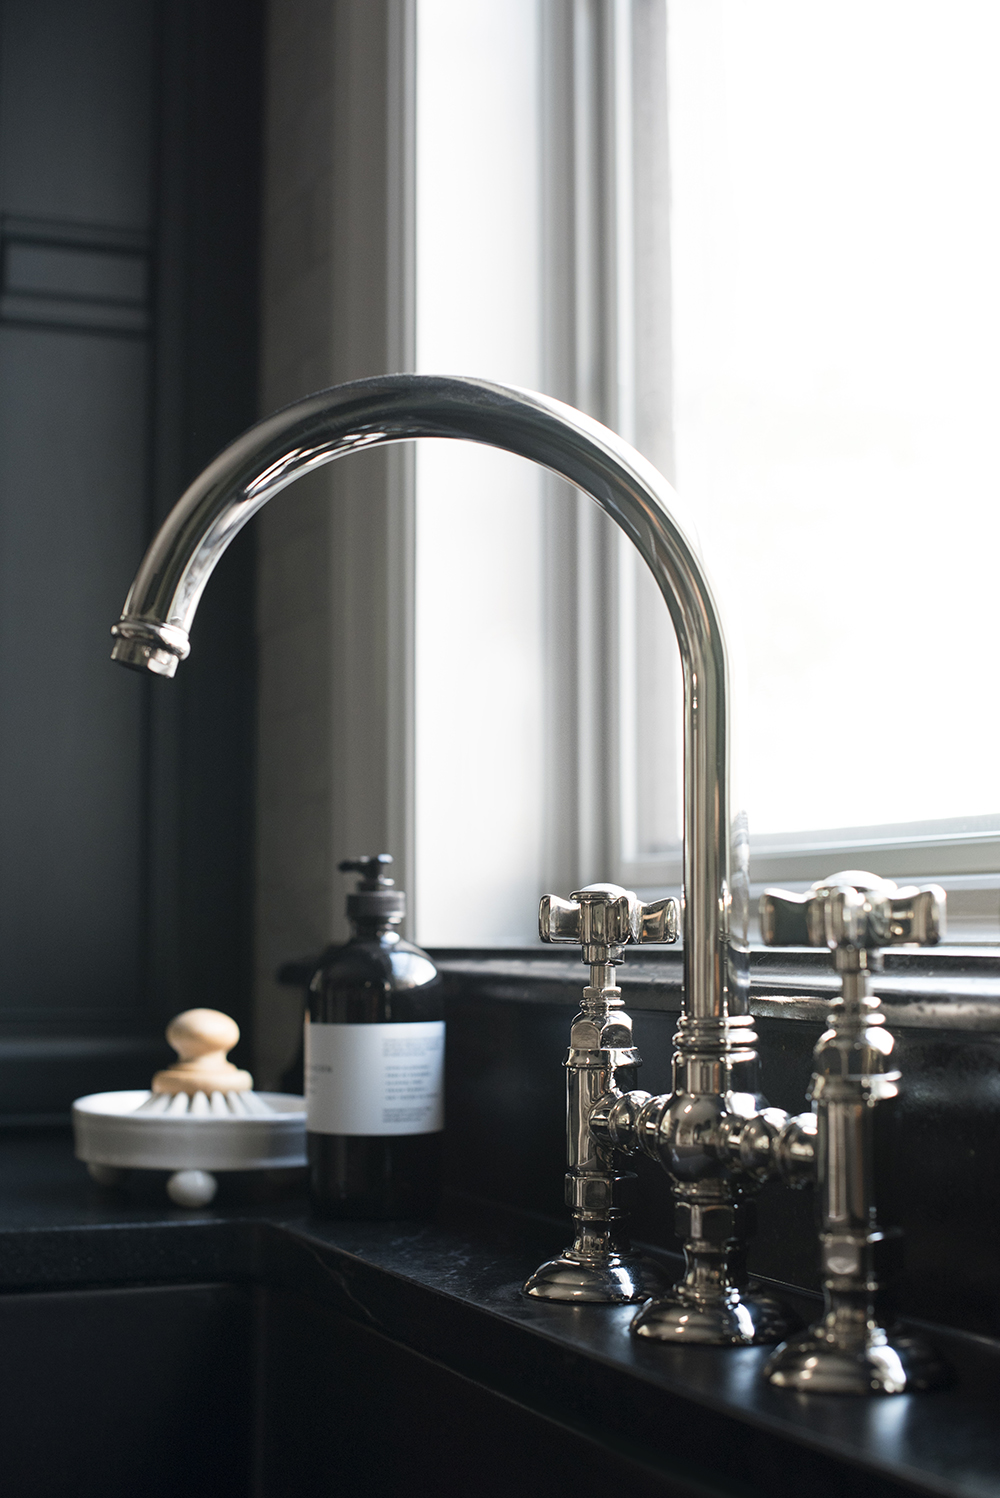 Bridge Mount Rohl Kitchen Faucet Room For Tuesday